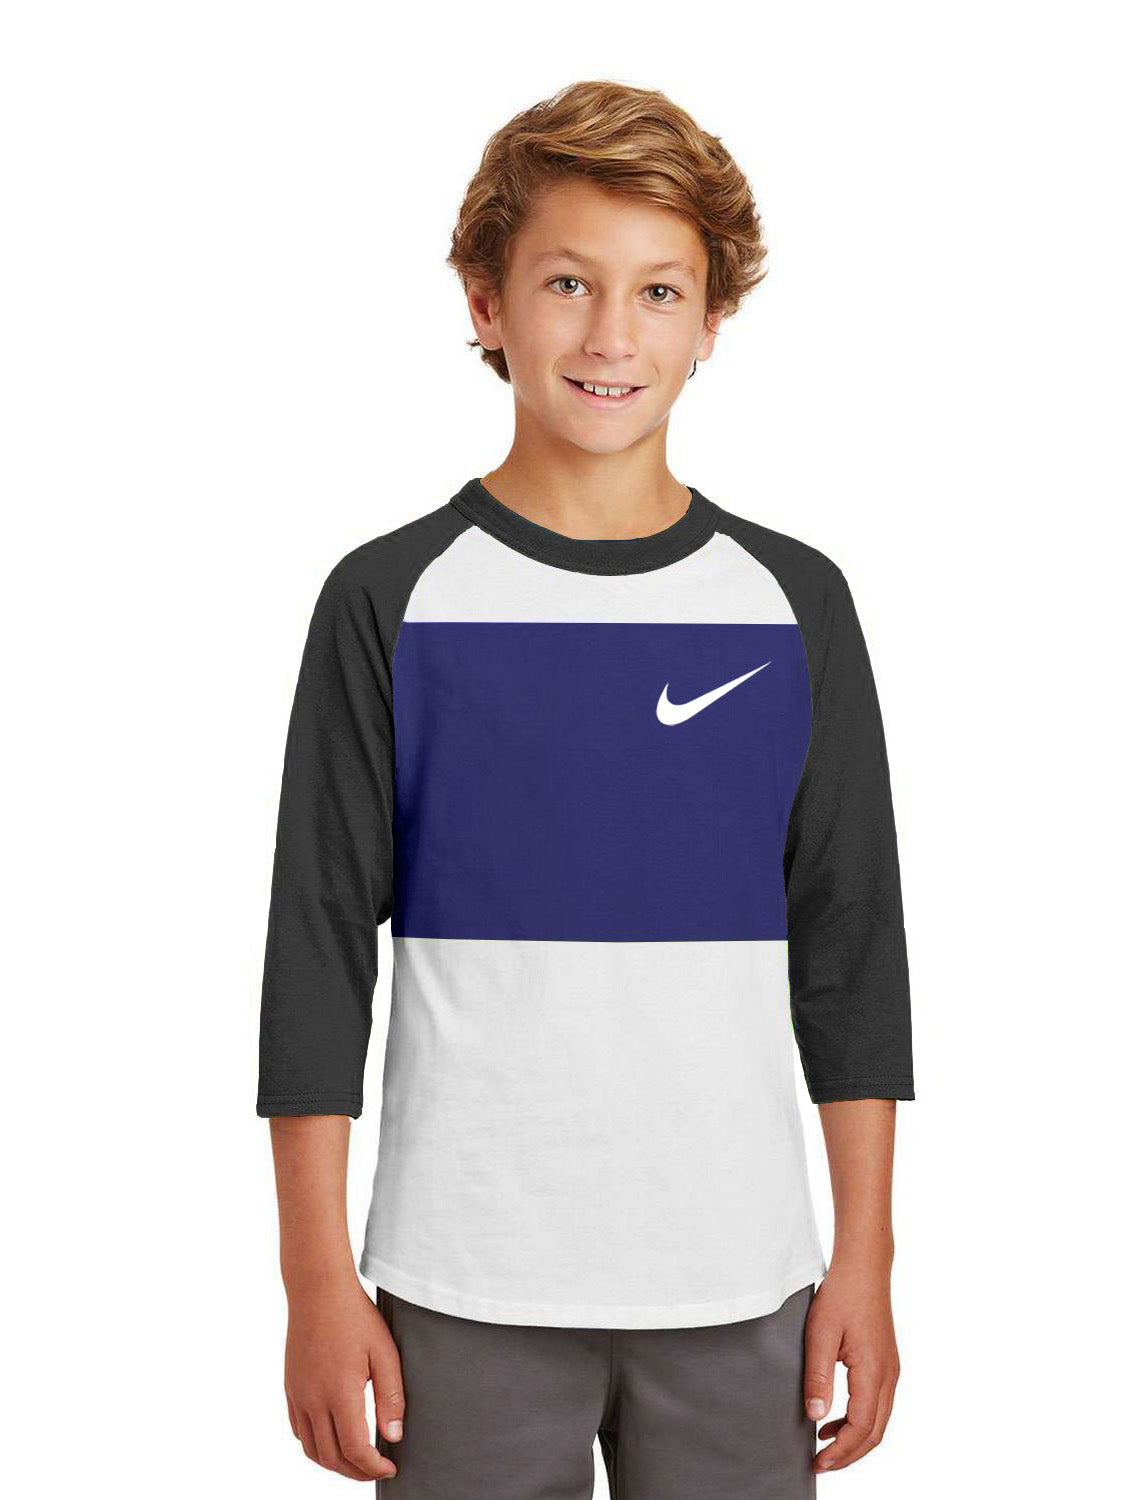 NK Single Jersey Tee Shirt For Kids-White & Charcoal Melange with Panel-SP2329